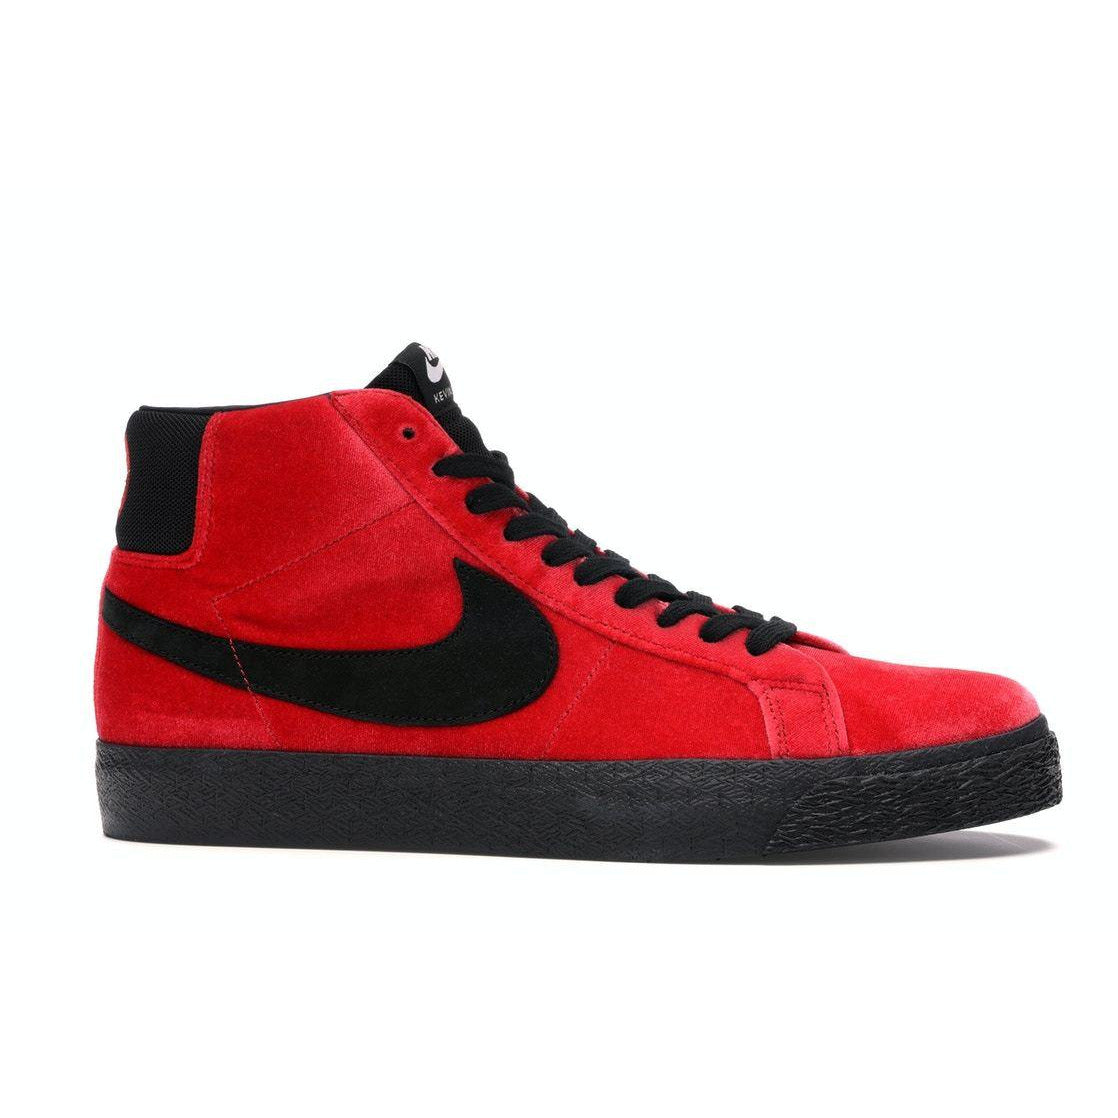 Nike SB Zoom Blazer Mid "Kevin and Hell" - THE GAME